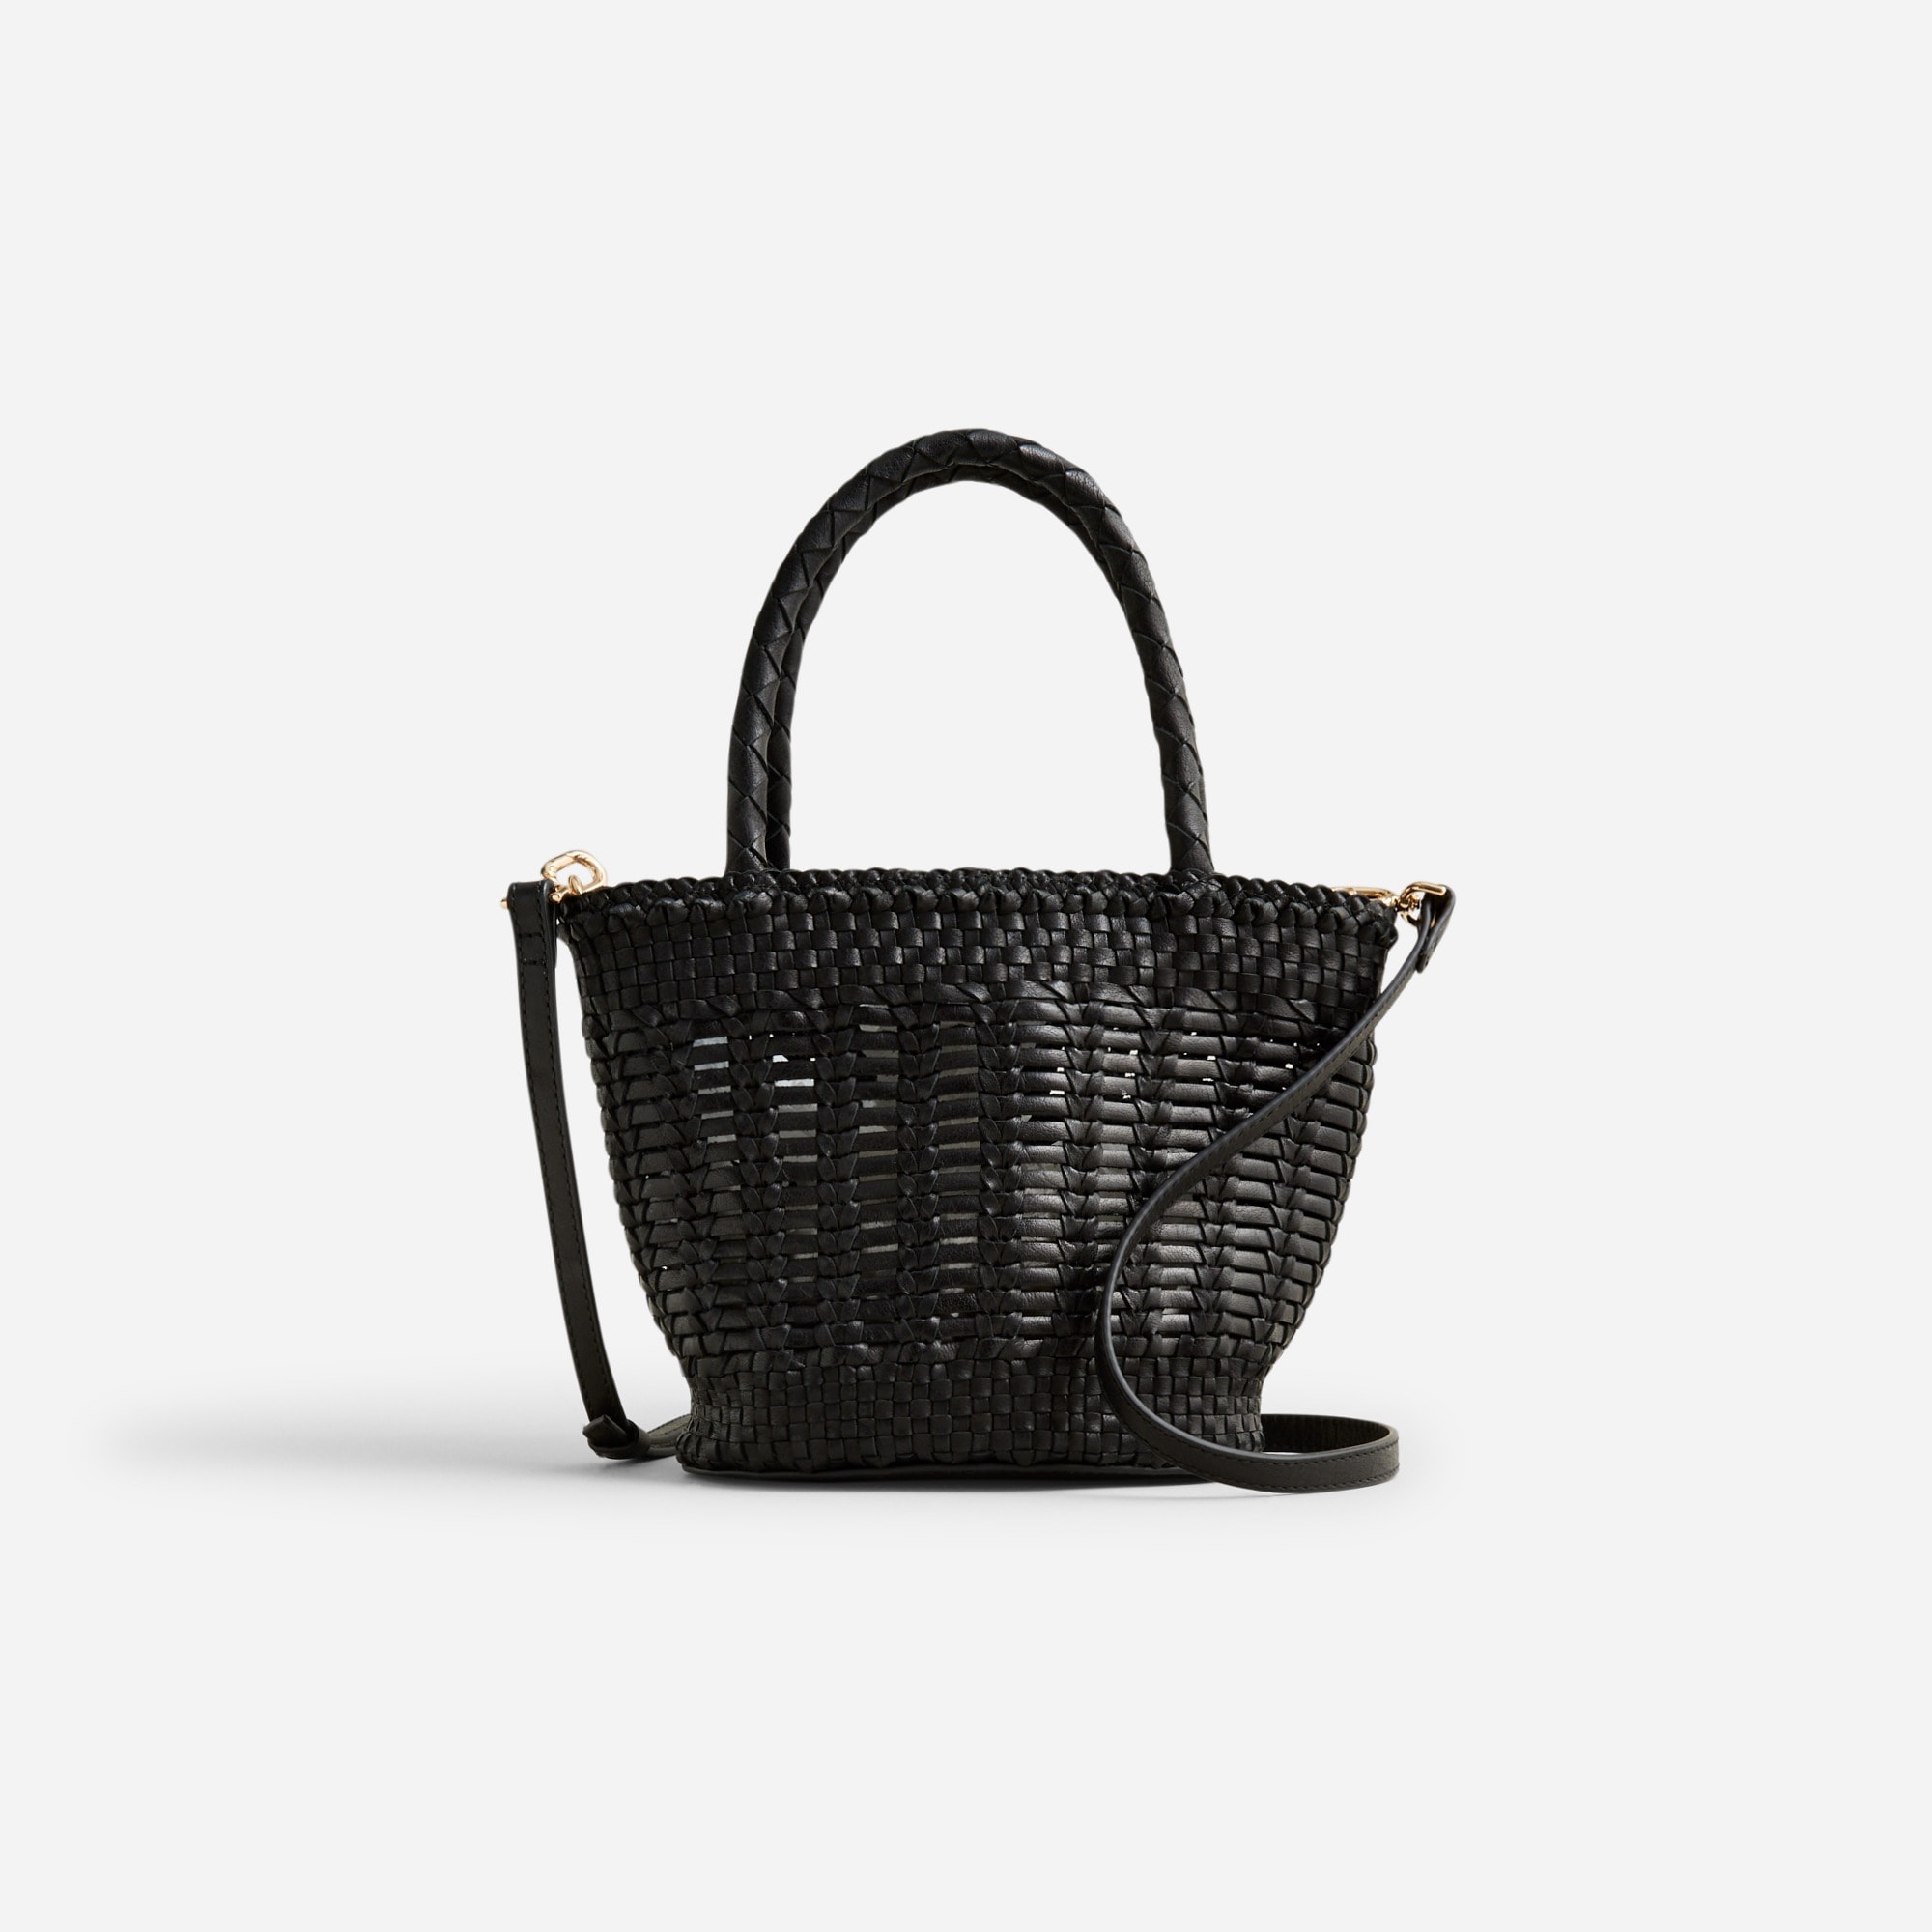  Small open-weave bag in leather